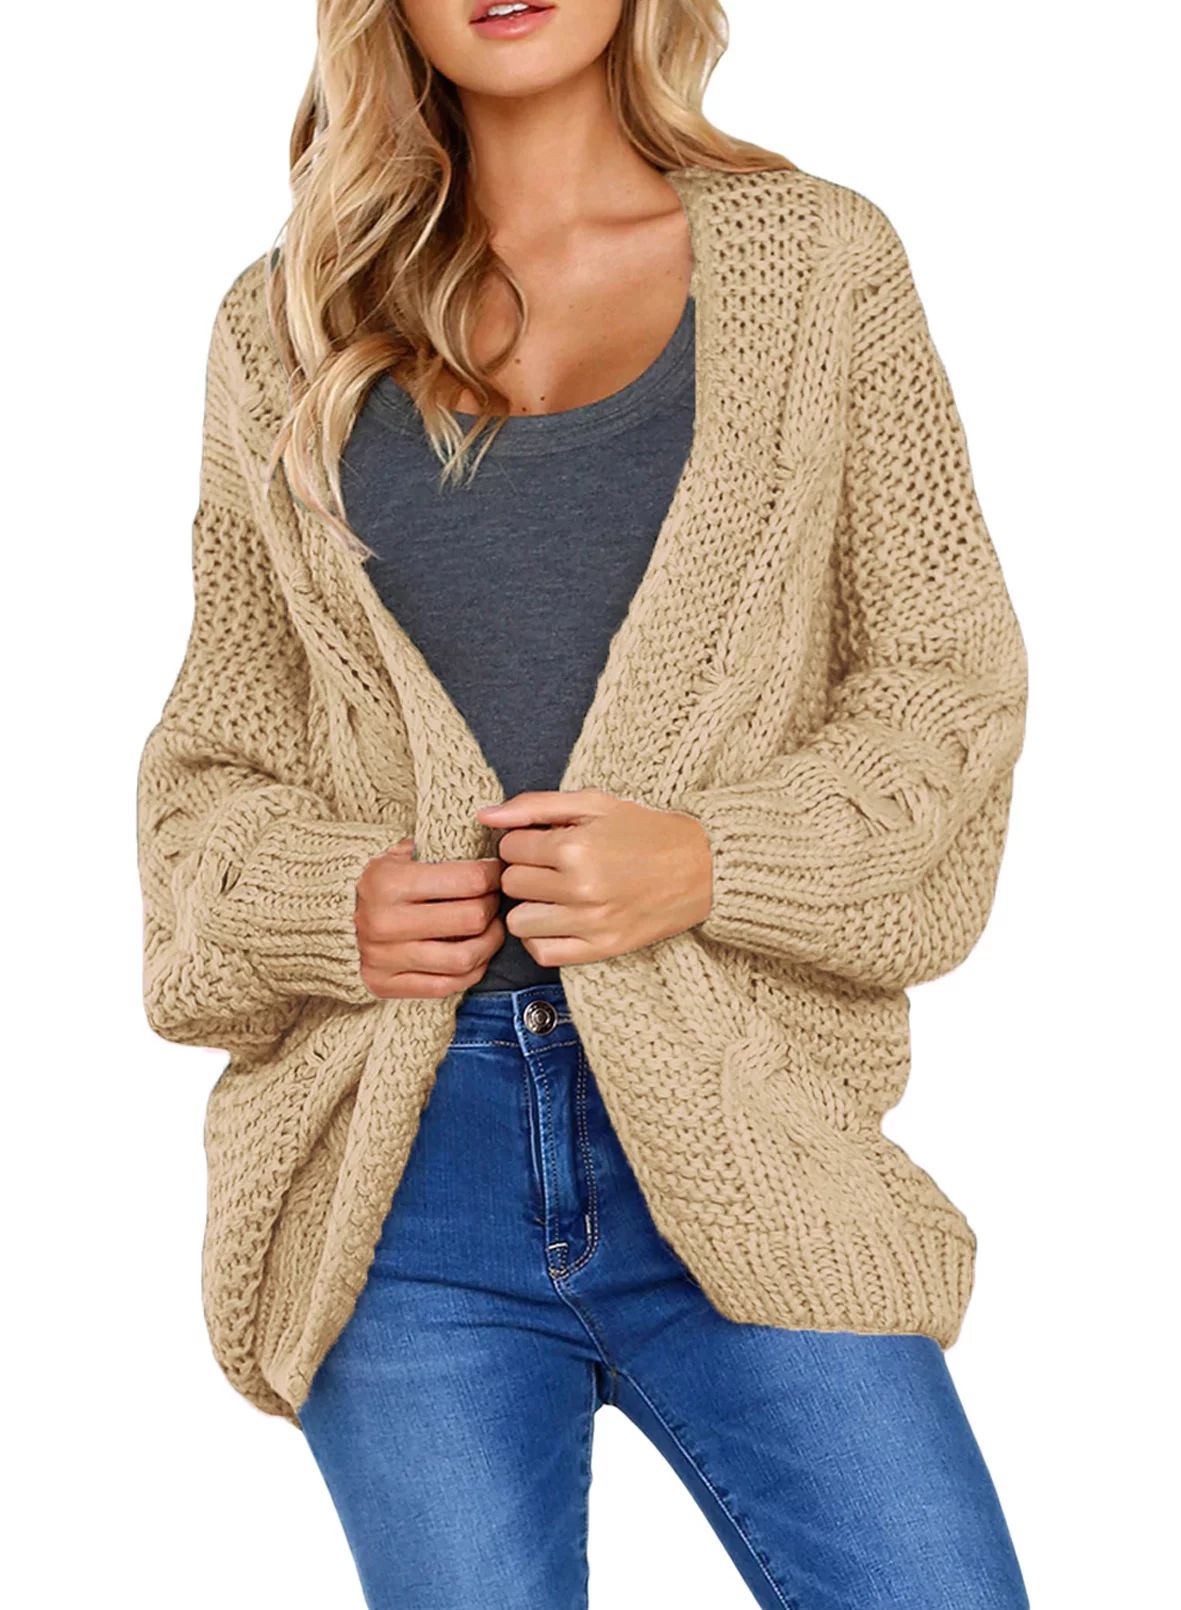 SHEWIN Womens Open Front Cardigans Sweater Beige Chunky Cable Knit Sweaters for Women Long Sleeve... | Walmart (US)